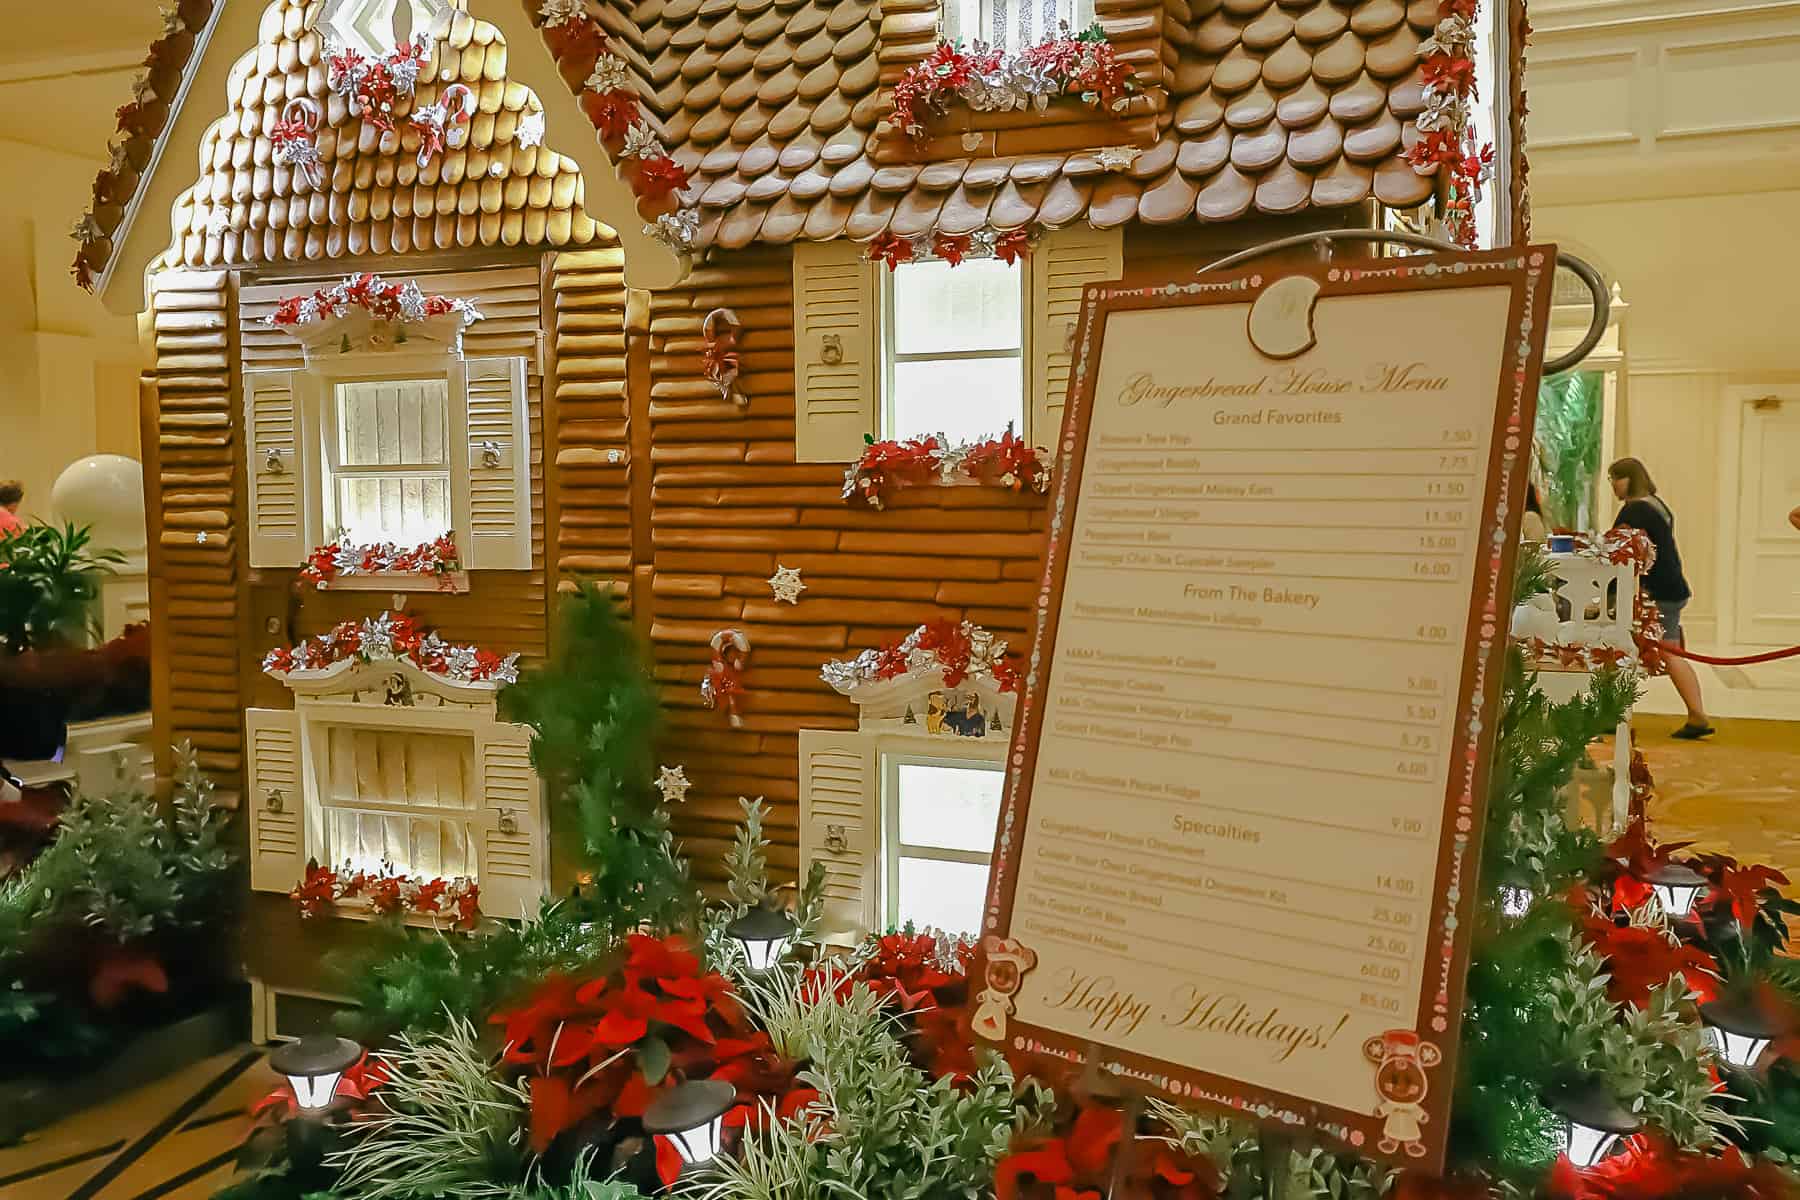 Shows the gingerbread house with a list of ingredients. 